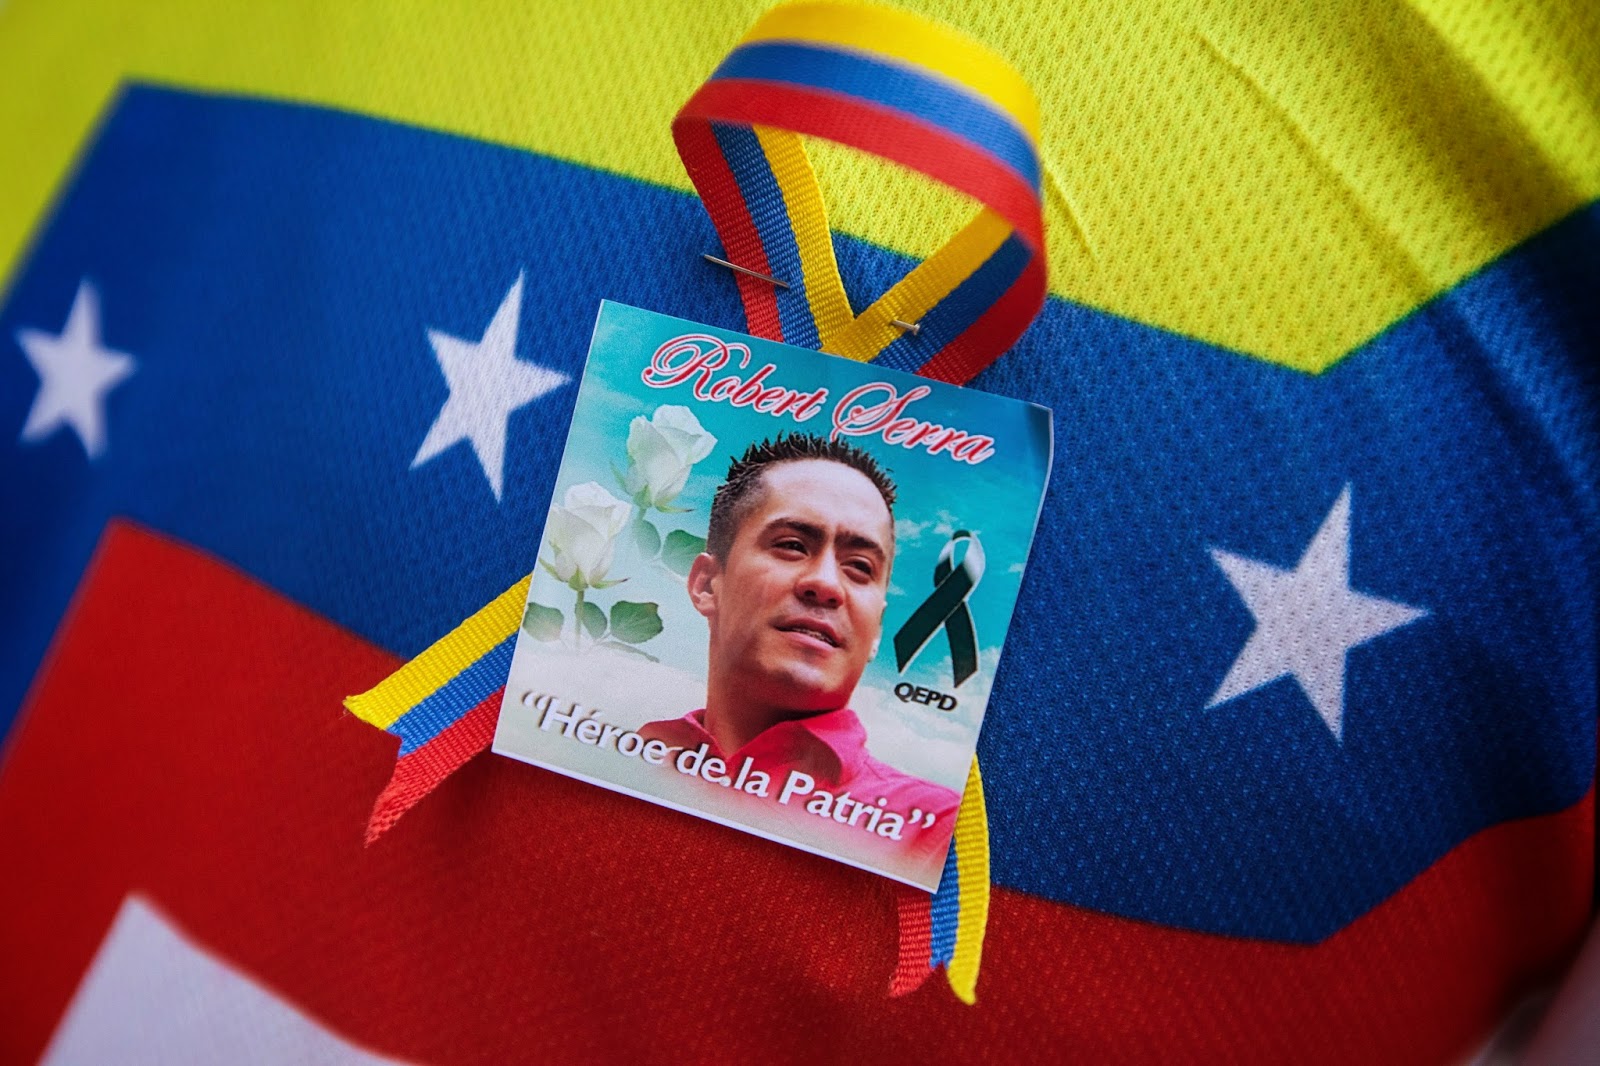 Evidence suggests Colombian Paramilitaries were involved in the assassination of Robert Serra